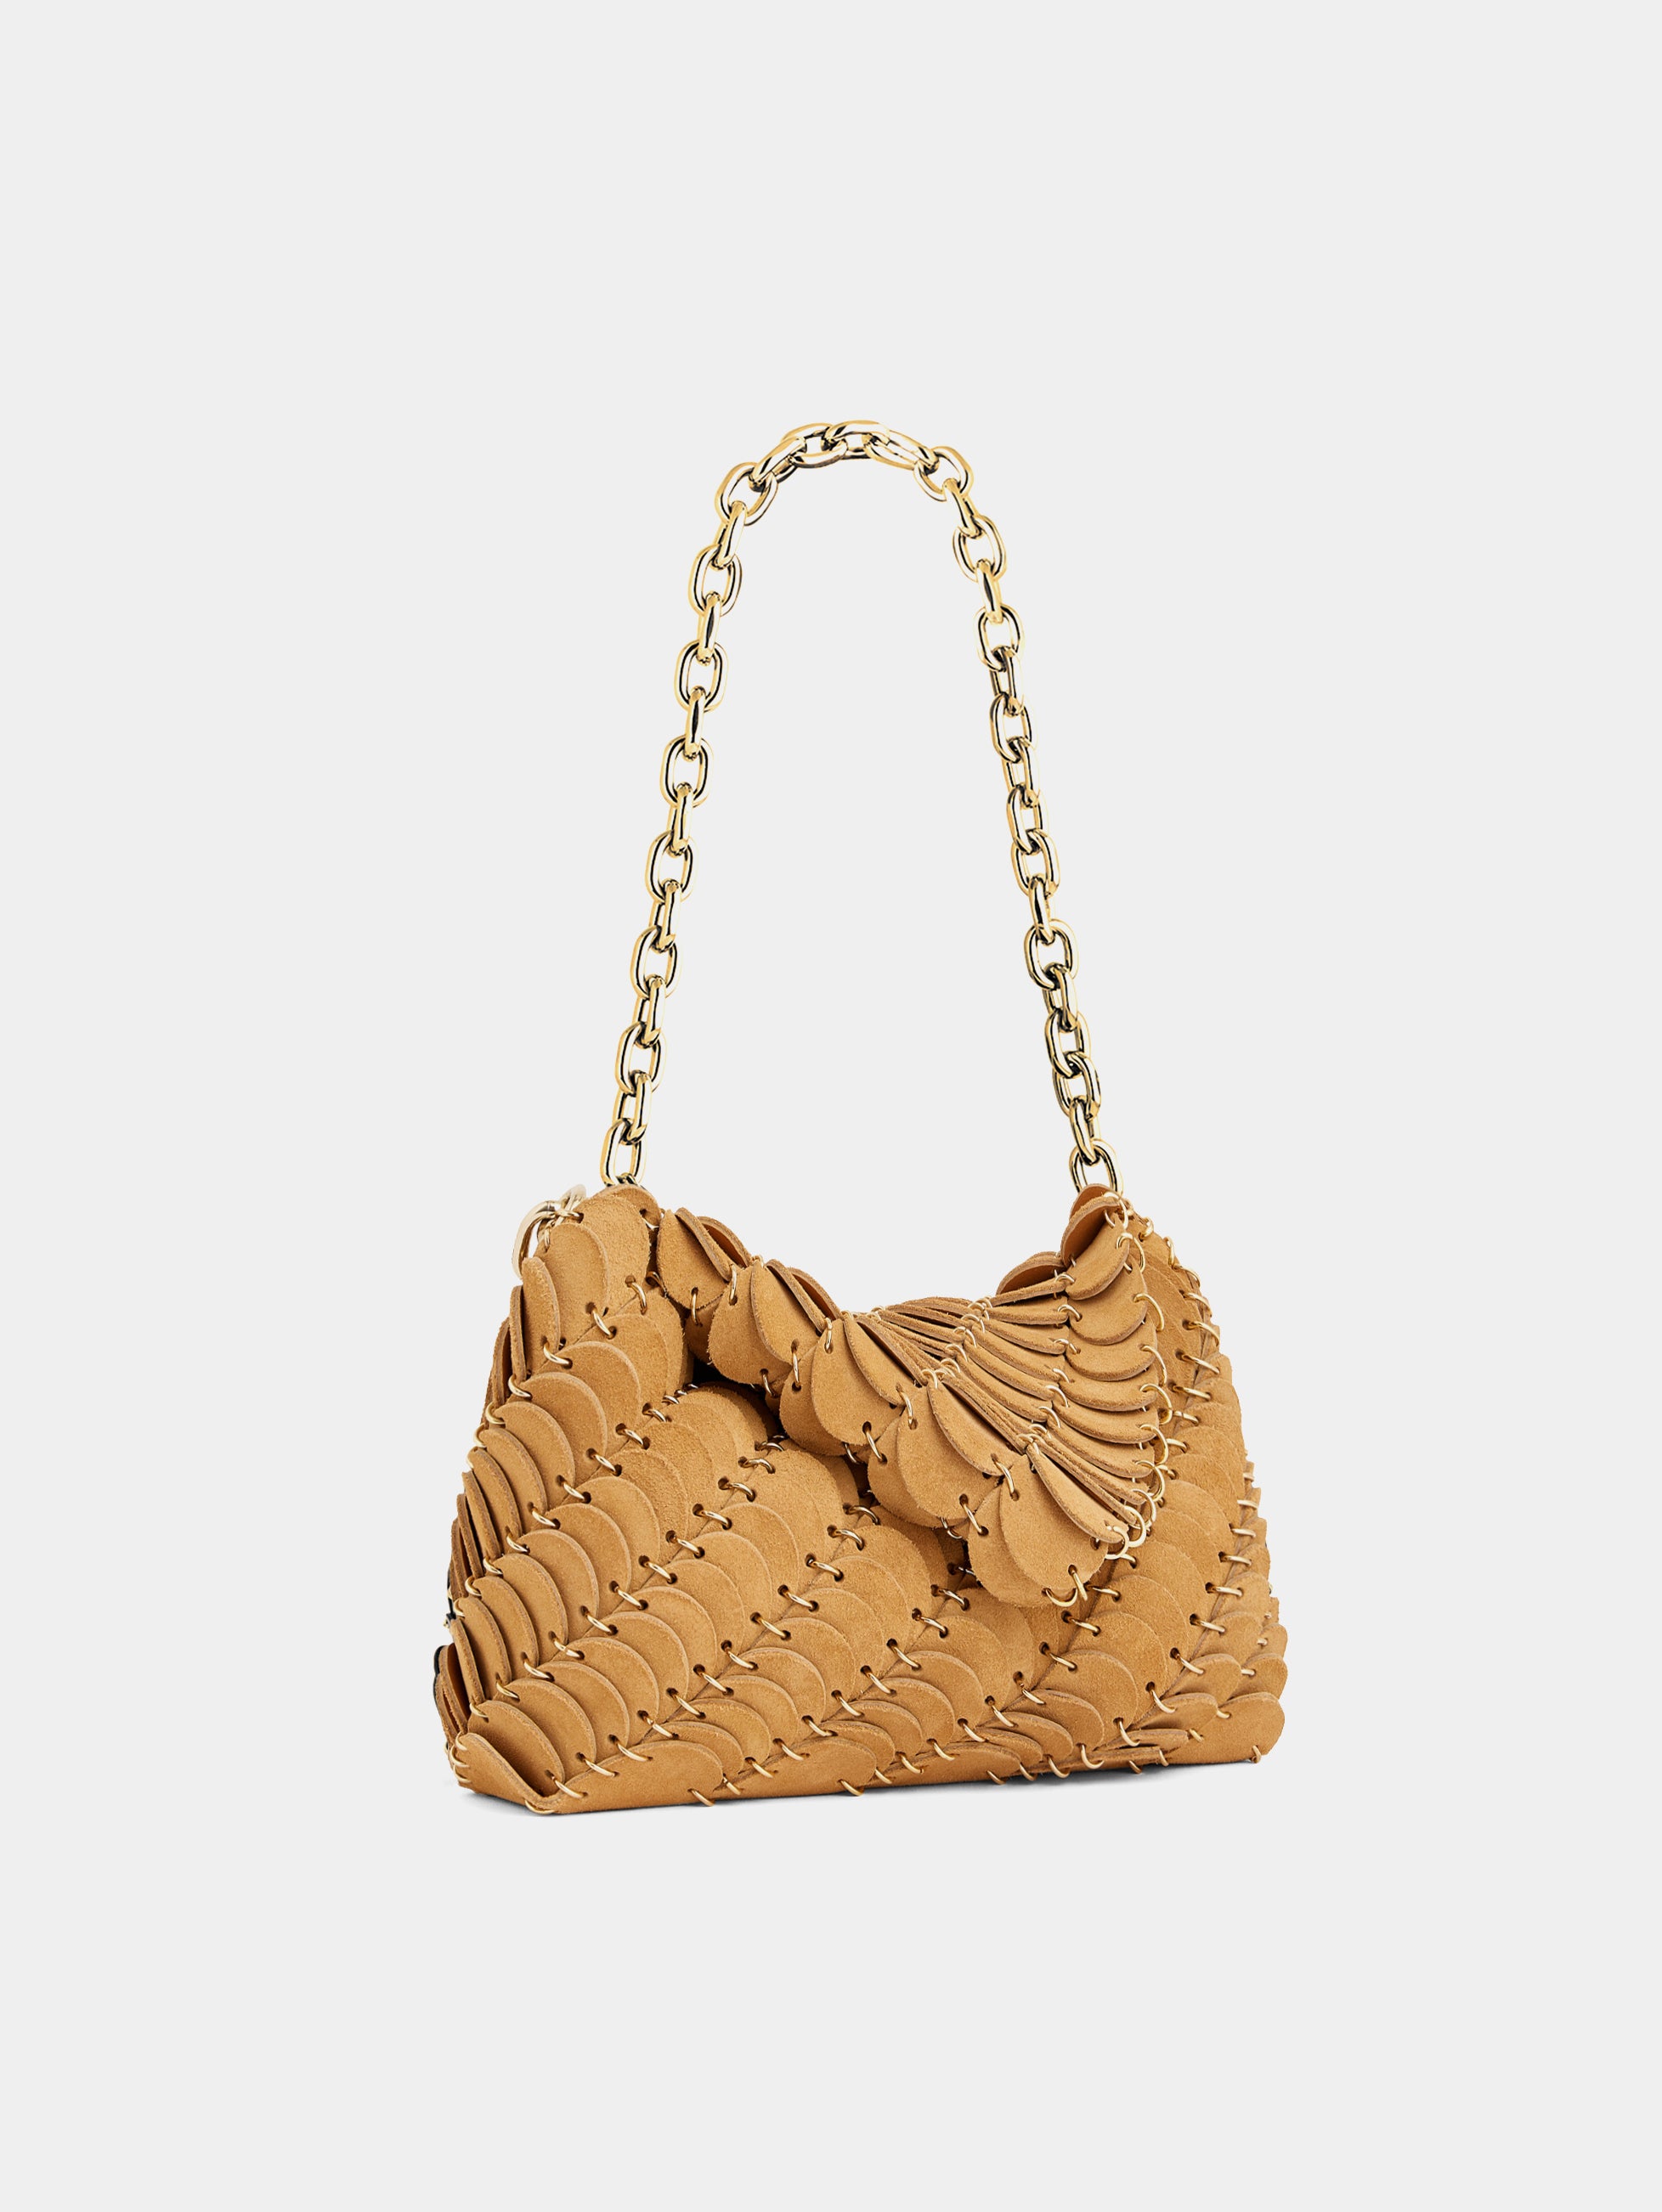 ALL BAGS FOR WOMEN | RABANNE